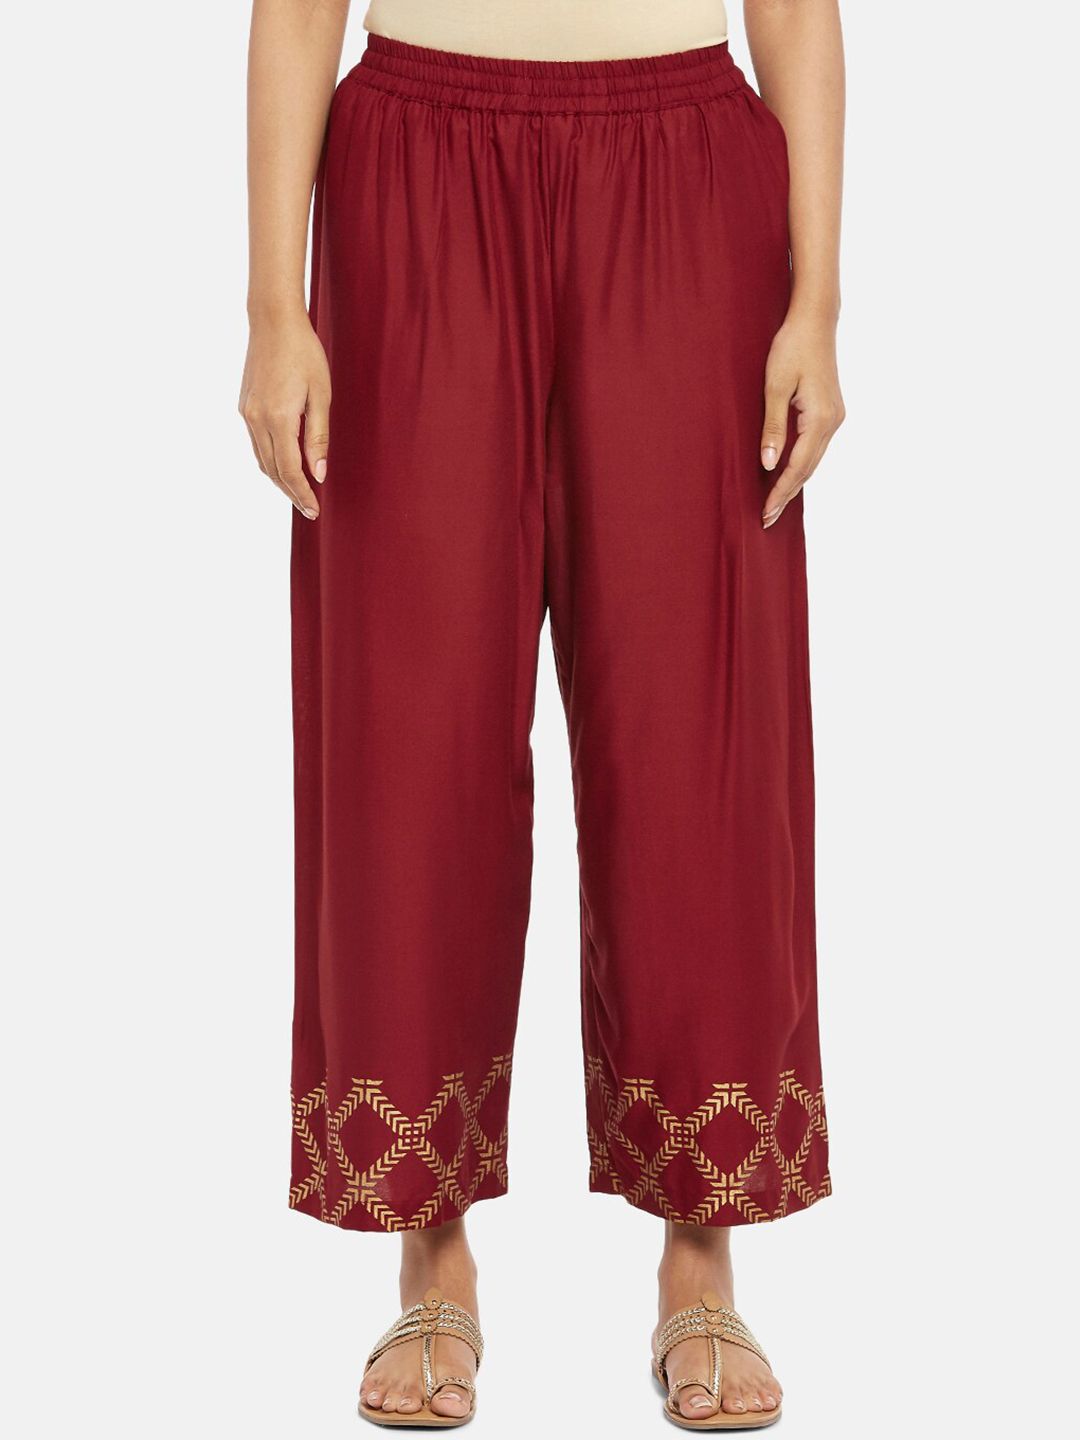 RANGMANCH BY PANTALOONS Women Maroon & Gold-Toned Ethnic Palazzos Price in India